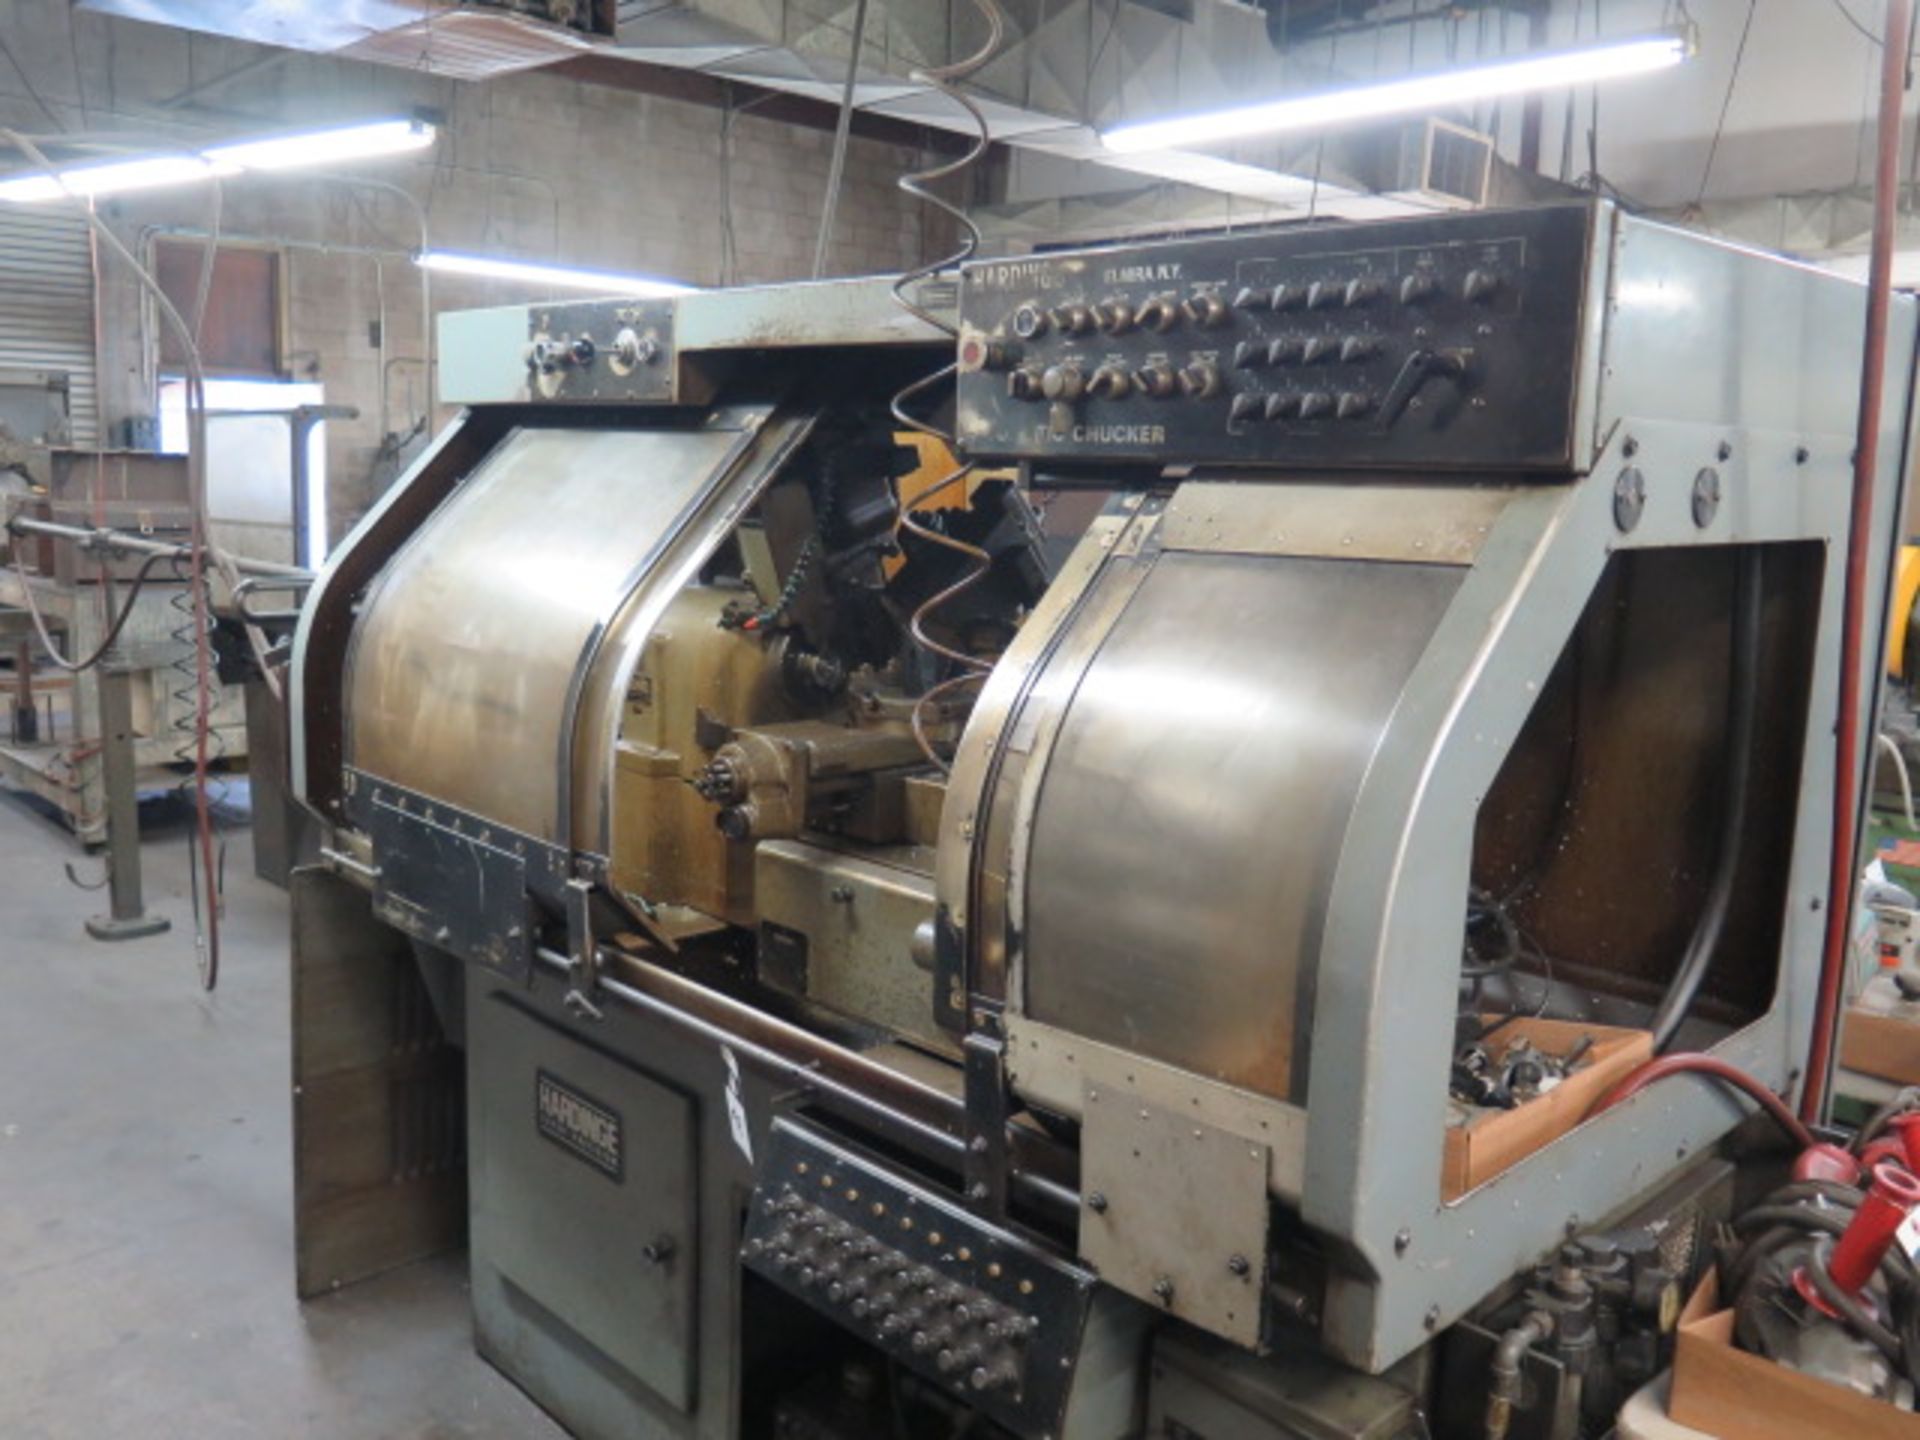 Hardinge AHC Automatic Hand Chucker w/ Hardinge Controls, 8-Station Turret, Auto Cycles, SOLD AS IS - Image 3 of 14